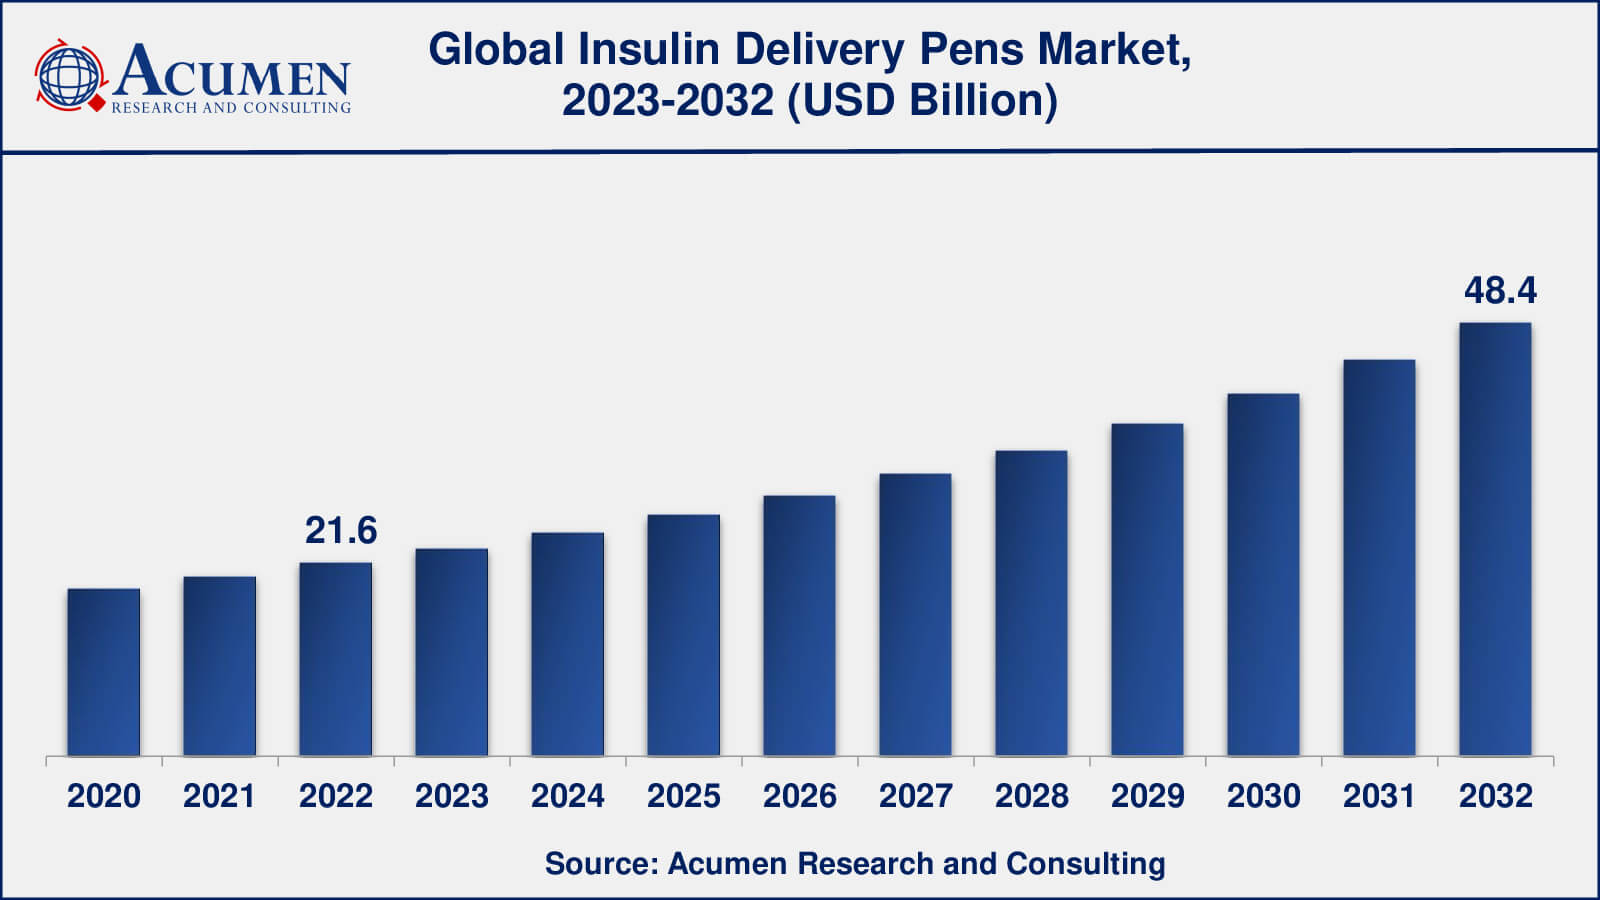 Insulin Delivery Pens Market Analysis Period